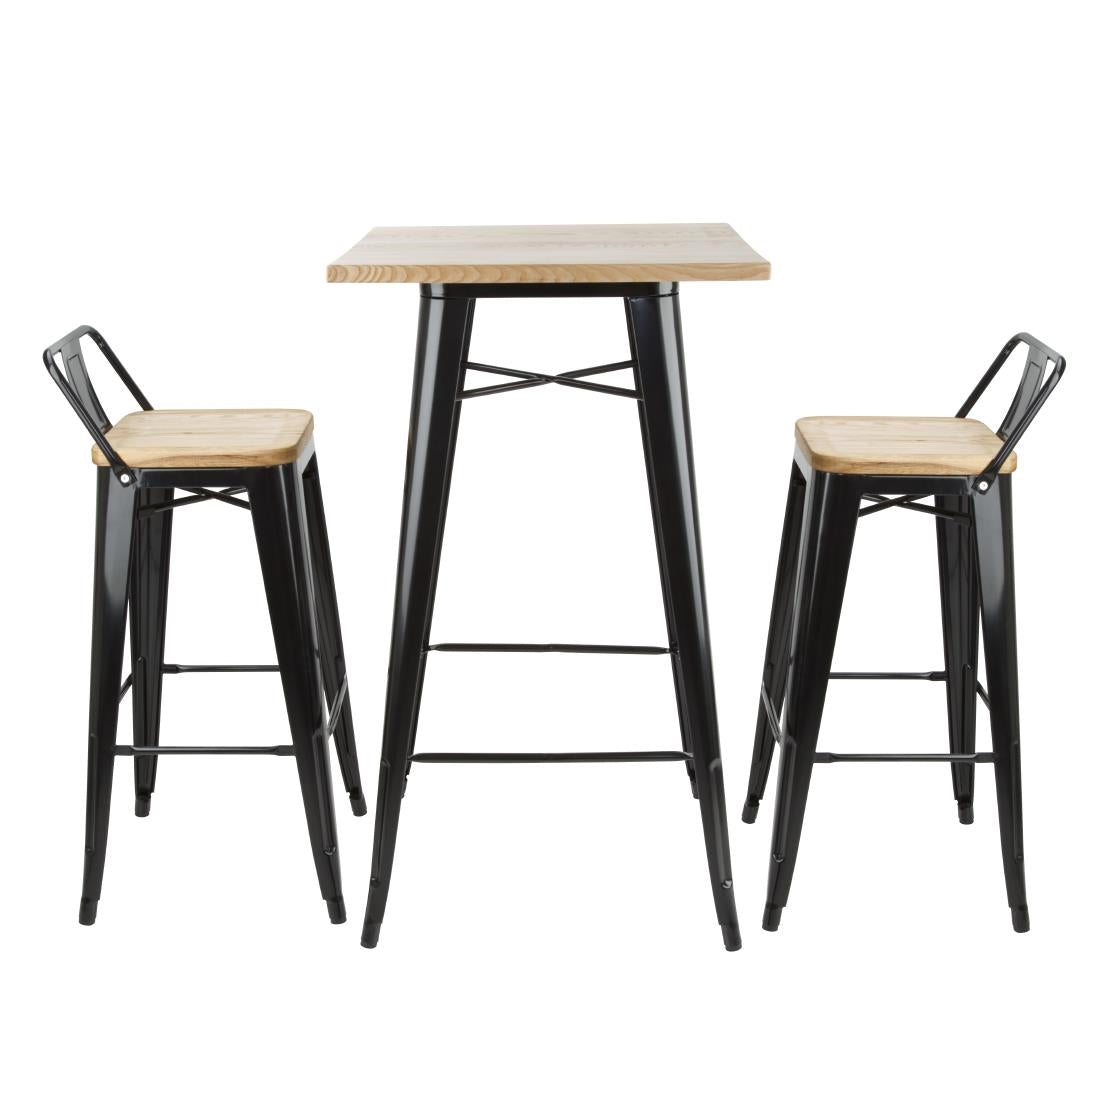 FB595 Bolero Bistro Bar Table with Wooden Top Black JD Catering Equipment Solutions Ltd